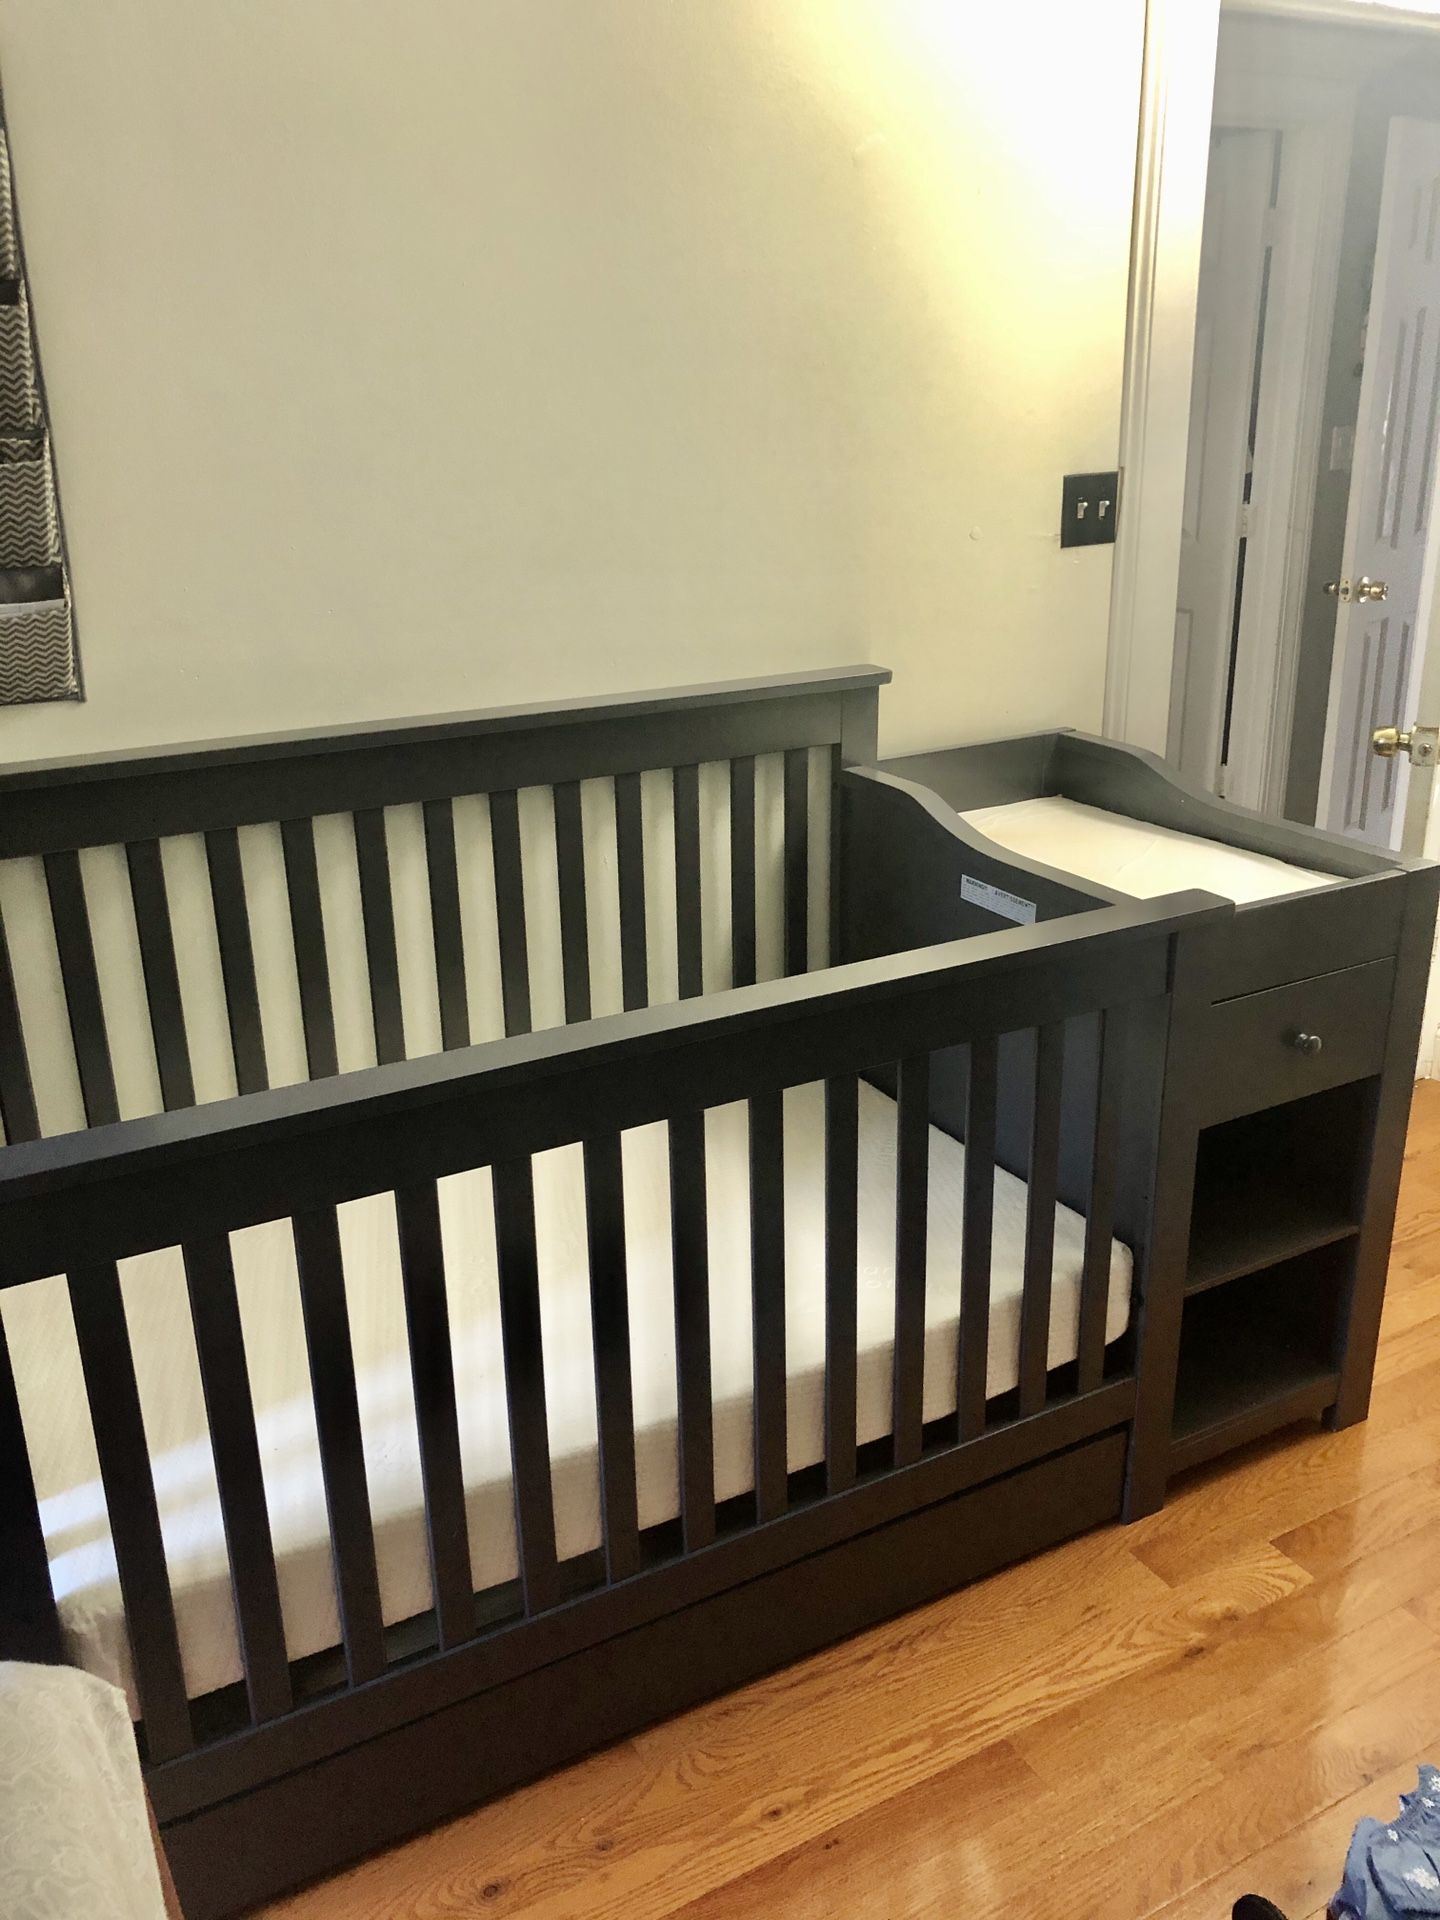 Baby crib with mattress and changing table.